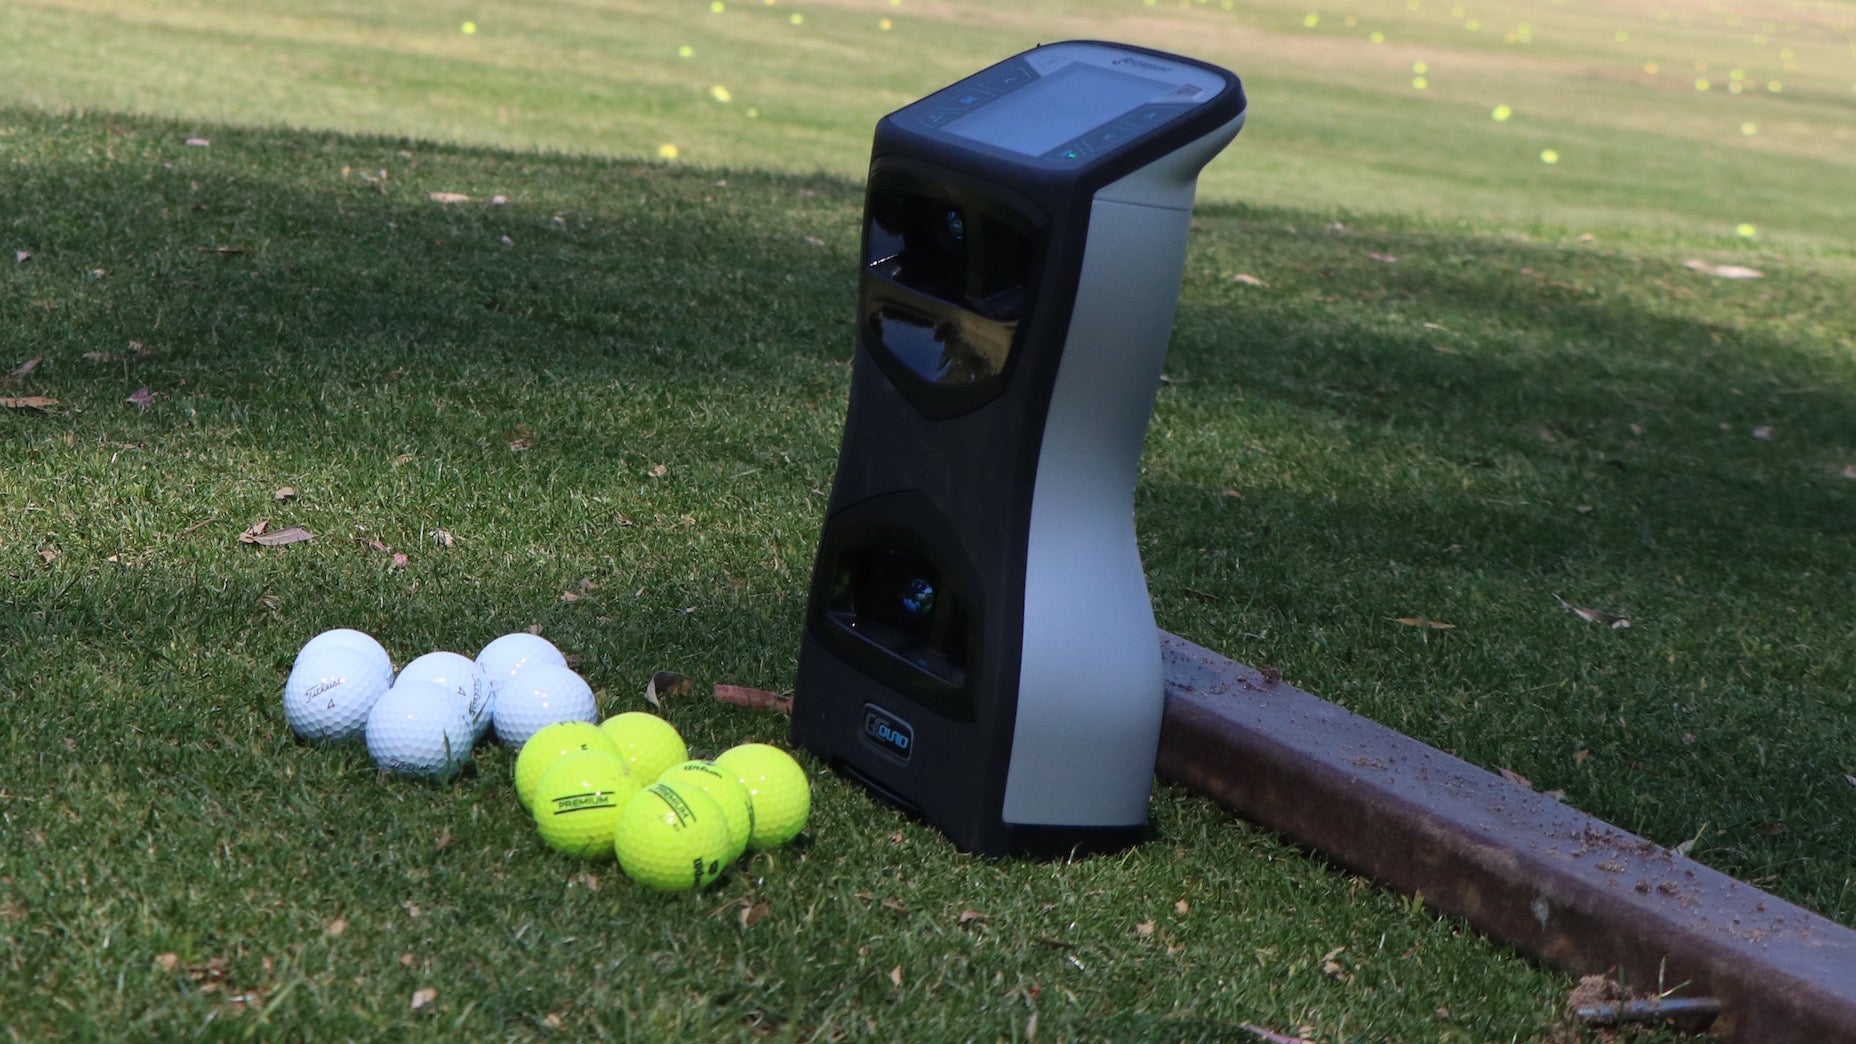 Range vs. Premium golf balls: I hit both on a launch monitor to find out  the differences